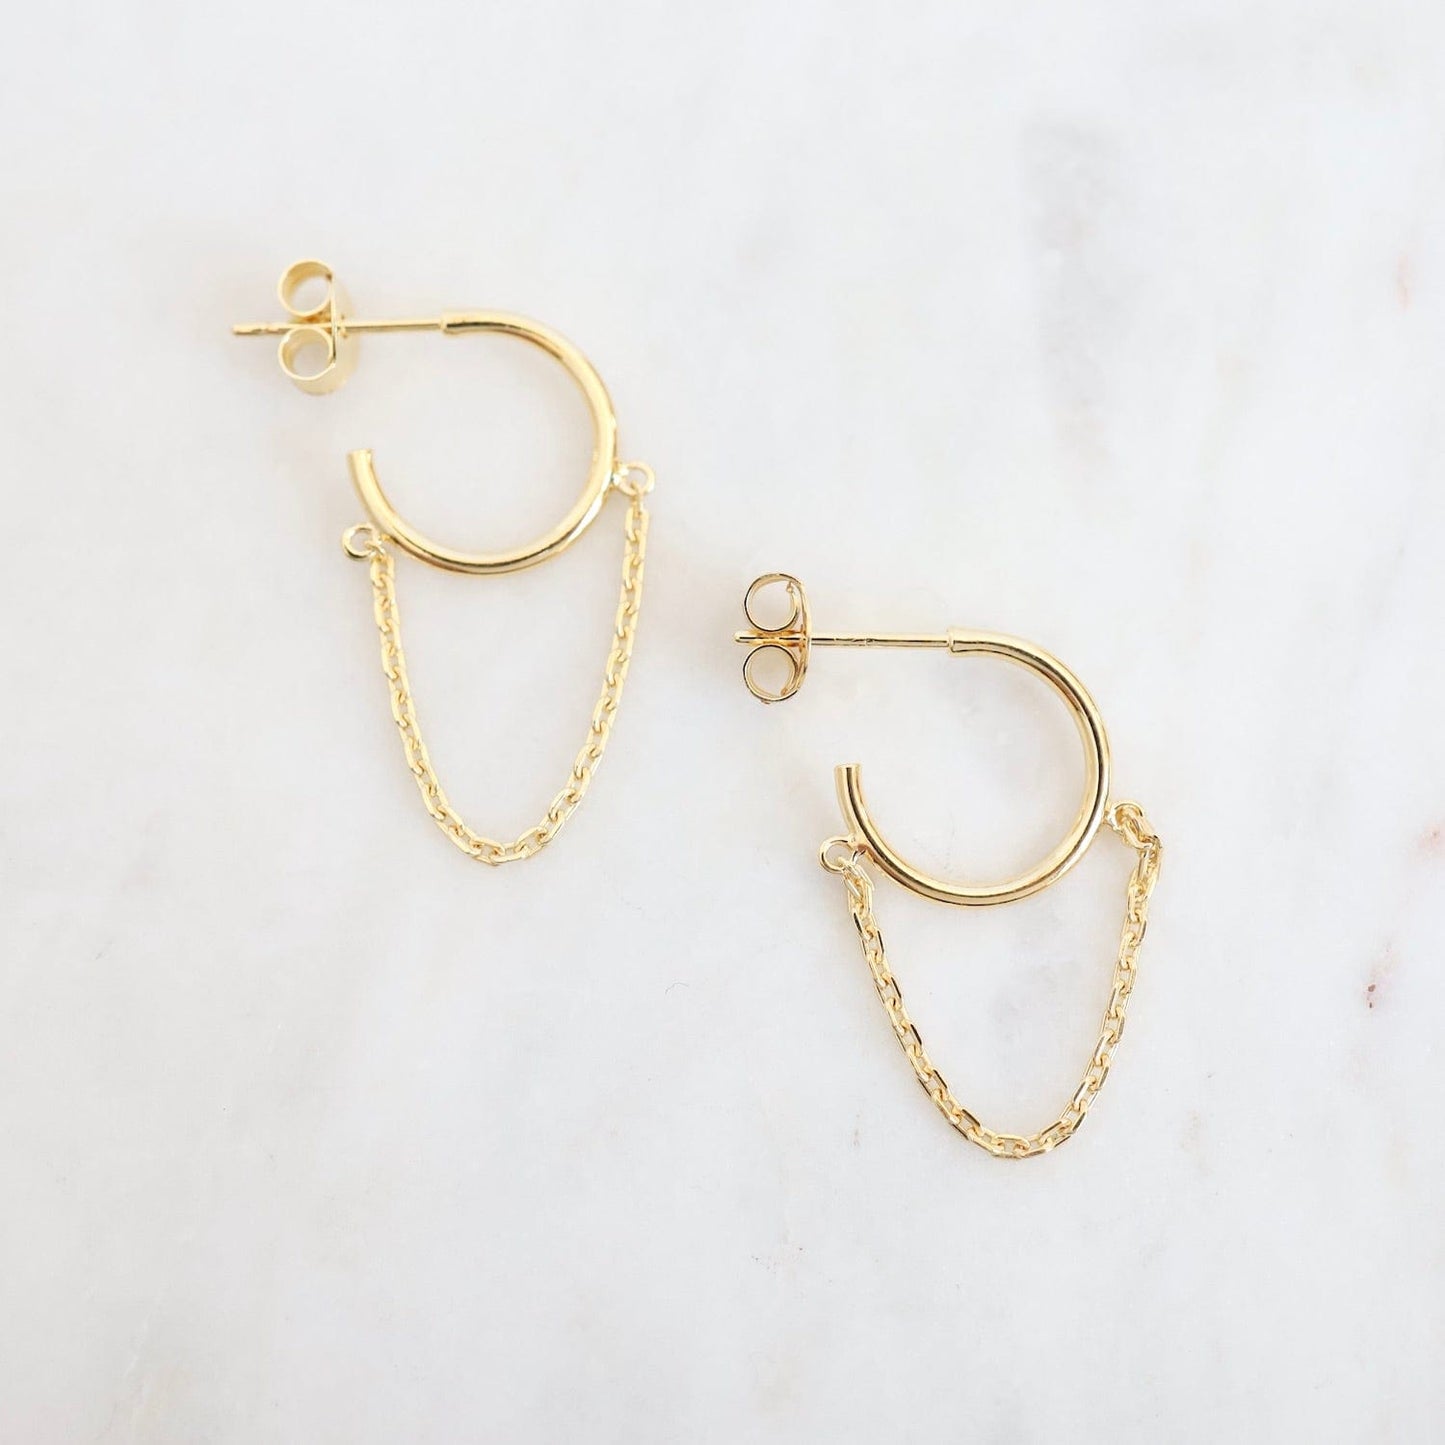 EAR-VRM 12mm Hoop with Dangling Chain in Gold Vermeil